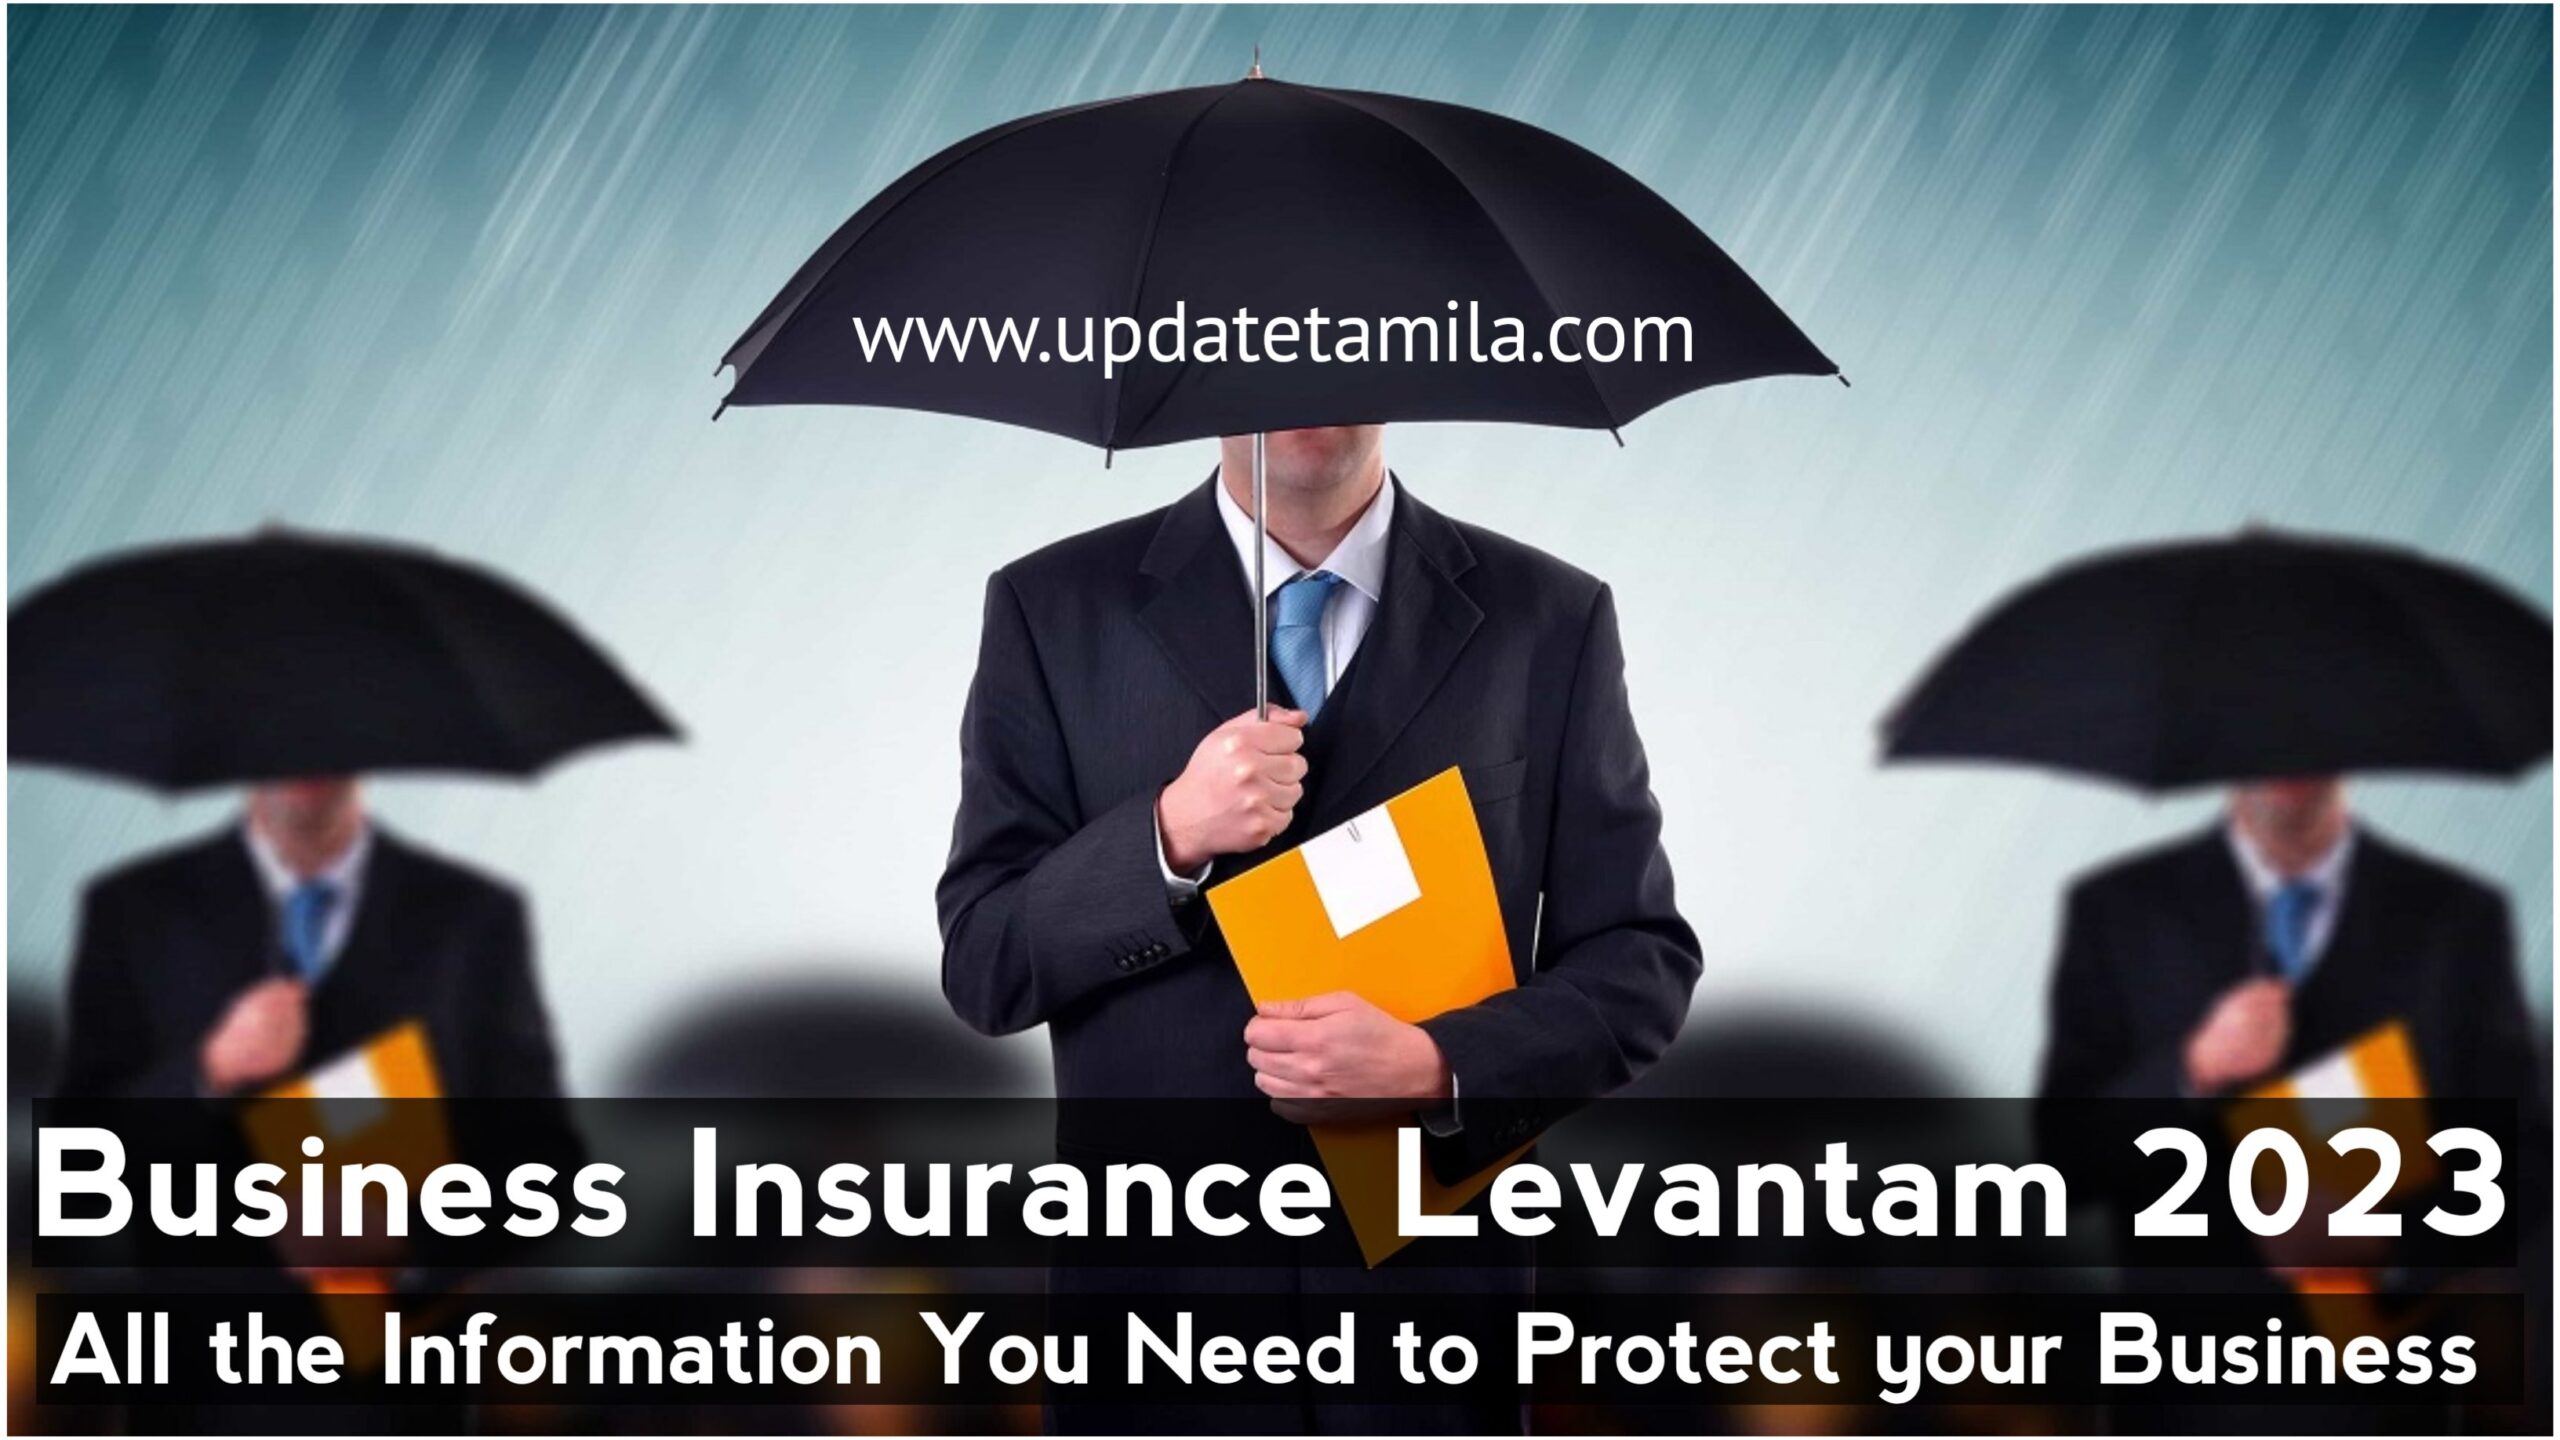 Business Insurance Levantam (2023): All the information you need to protect your business